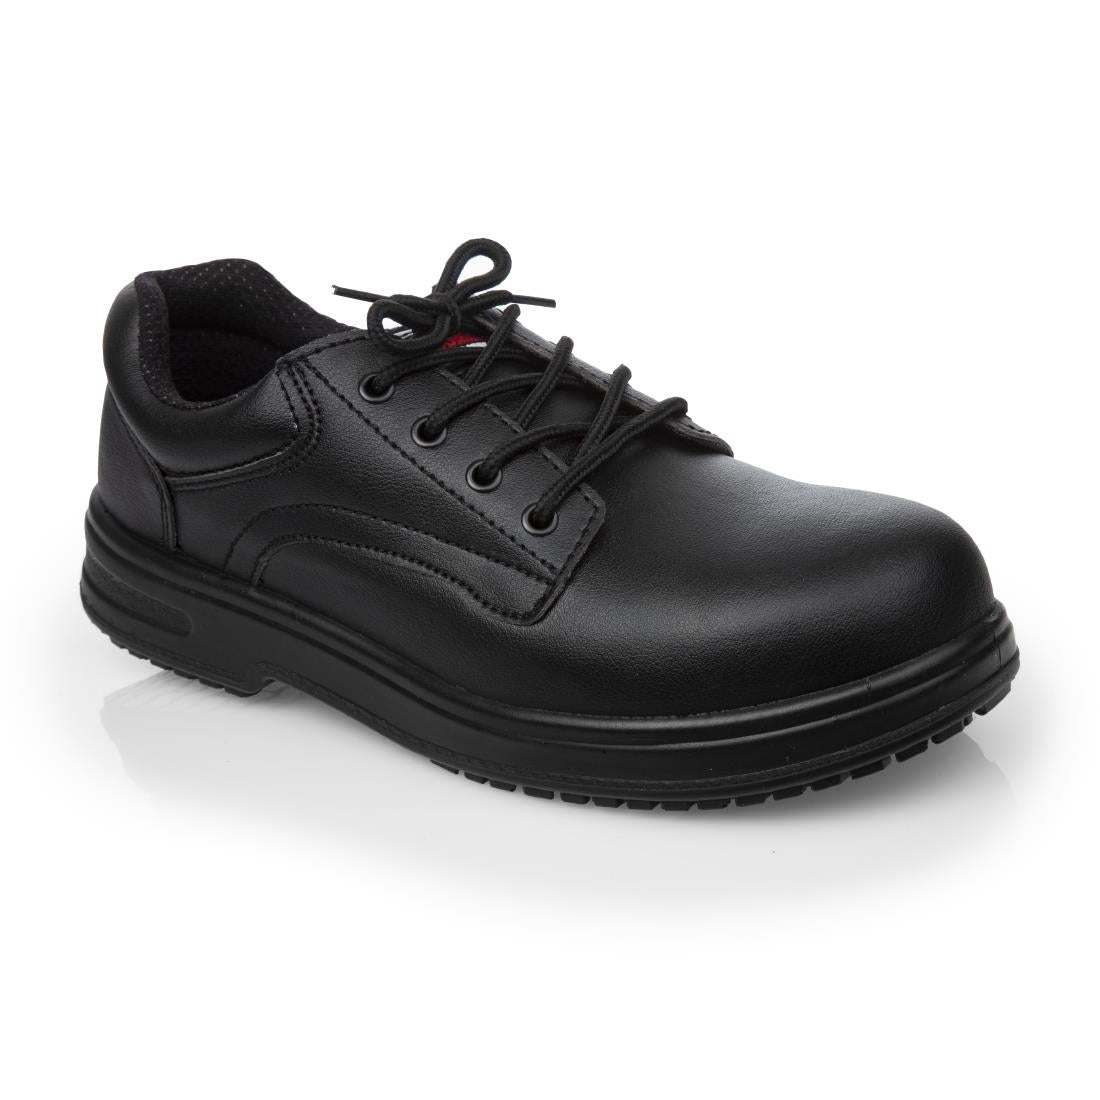 BB497-45 Slipbuster Basic Toe Cap Safety Shoes Black 45 JD Catering Equipment Solutions Ltd